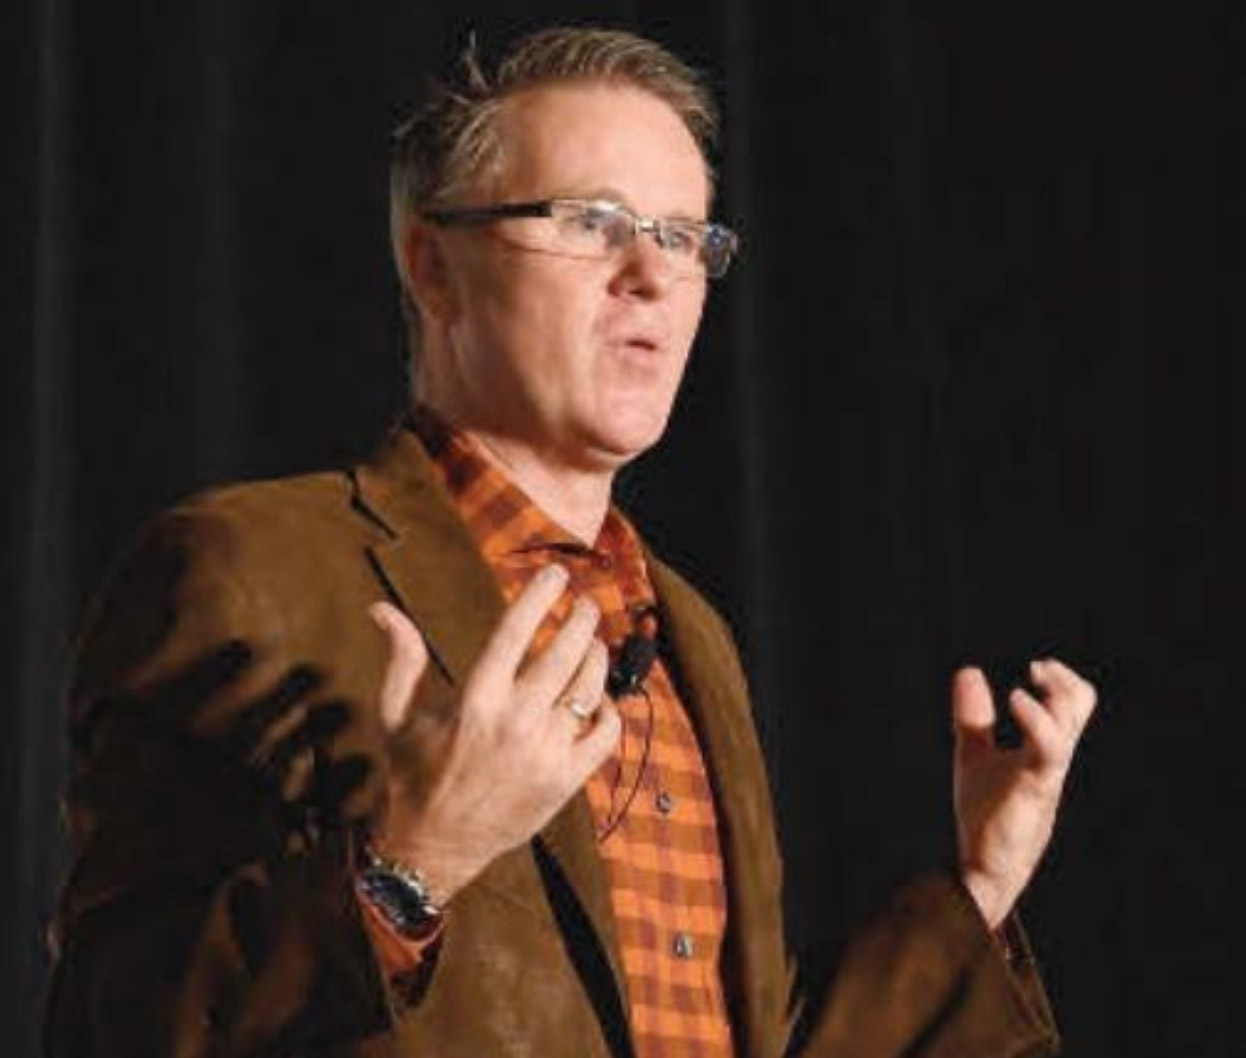 David Small speaking at a conference.